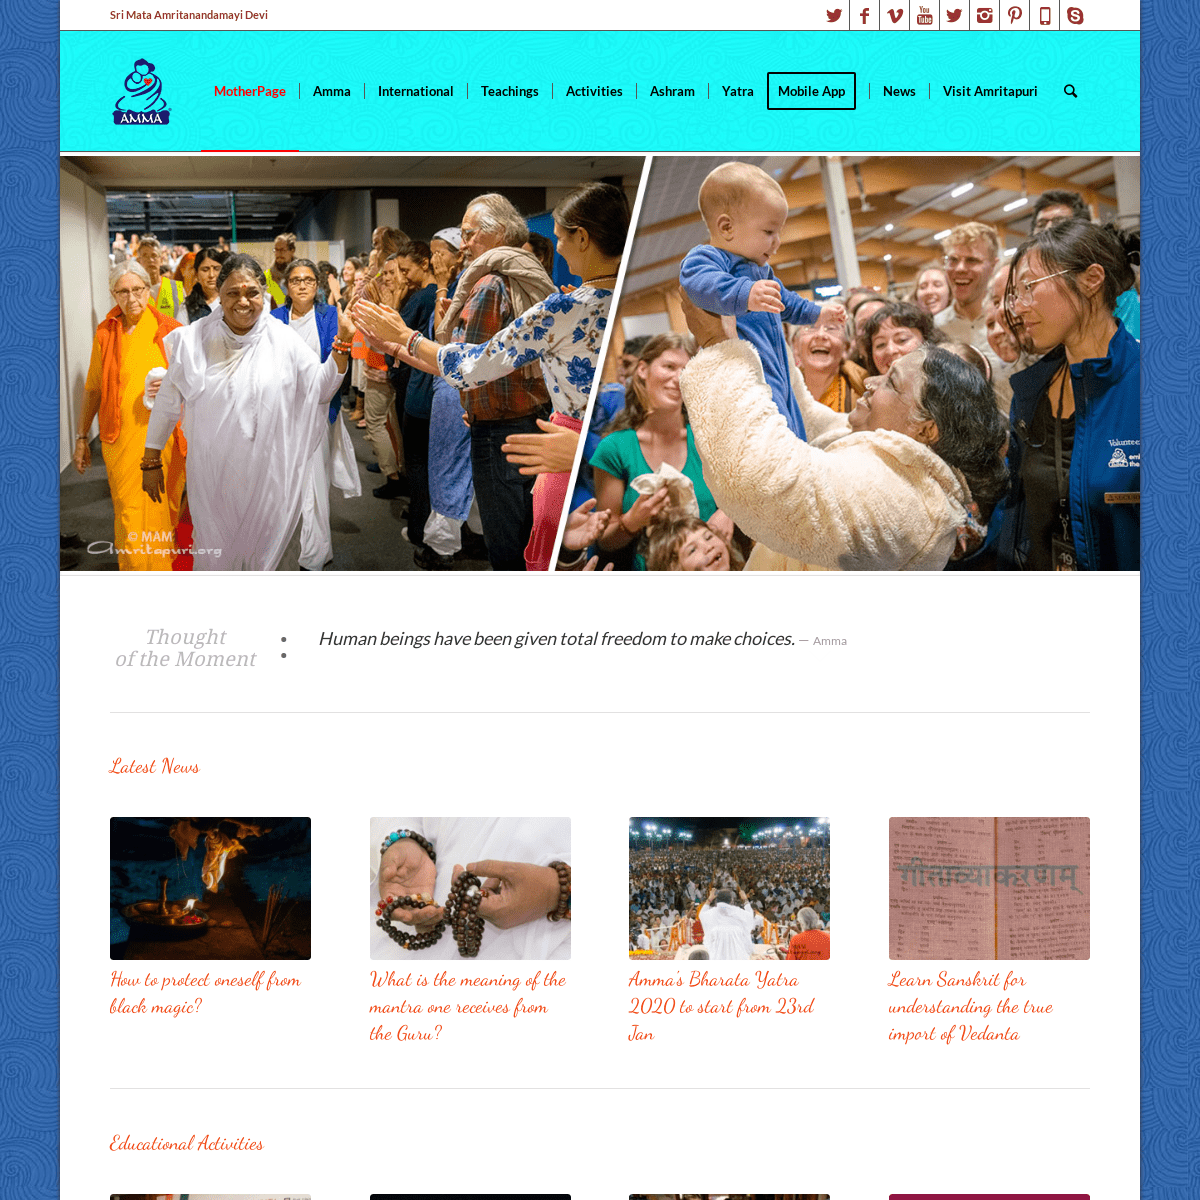 A complete backup of amritapuri.org